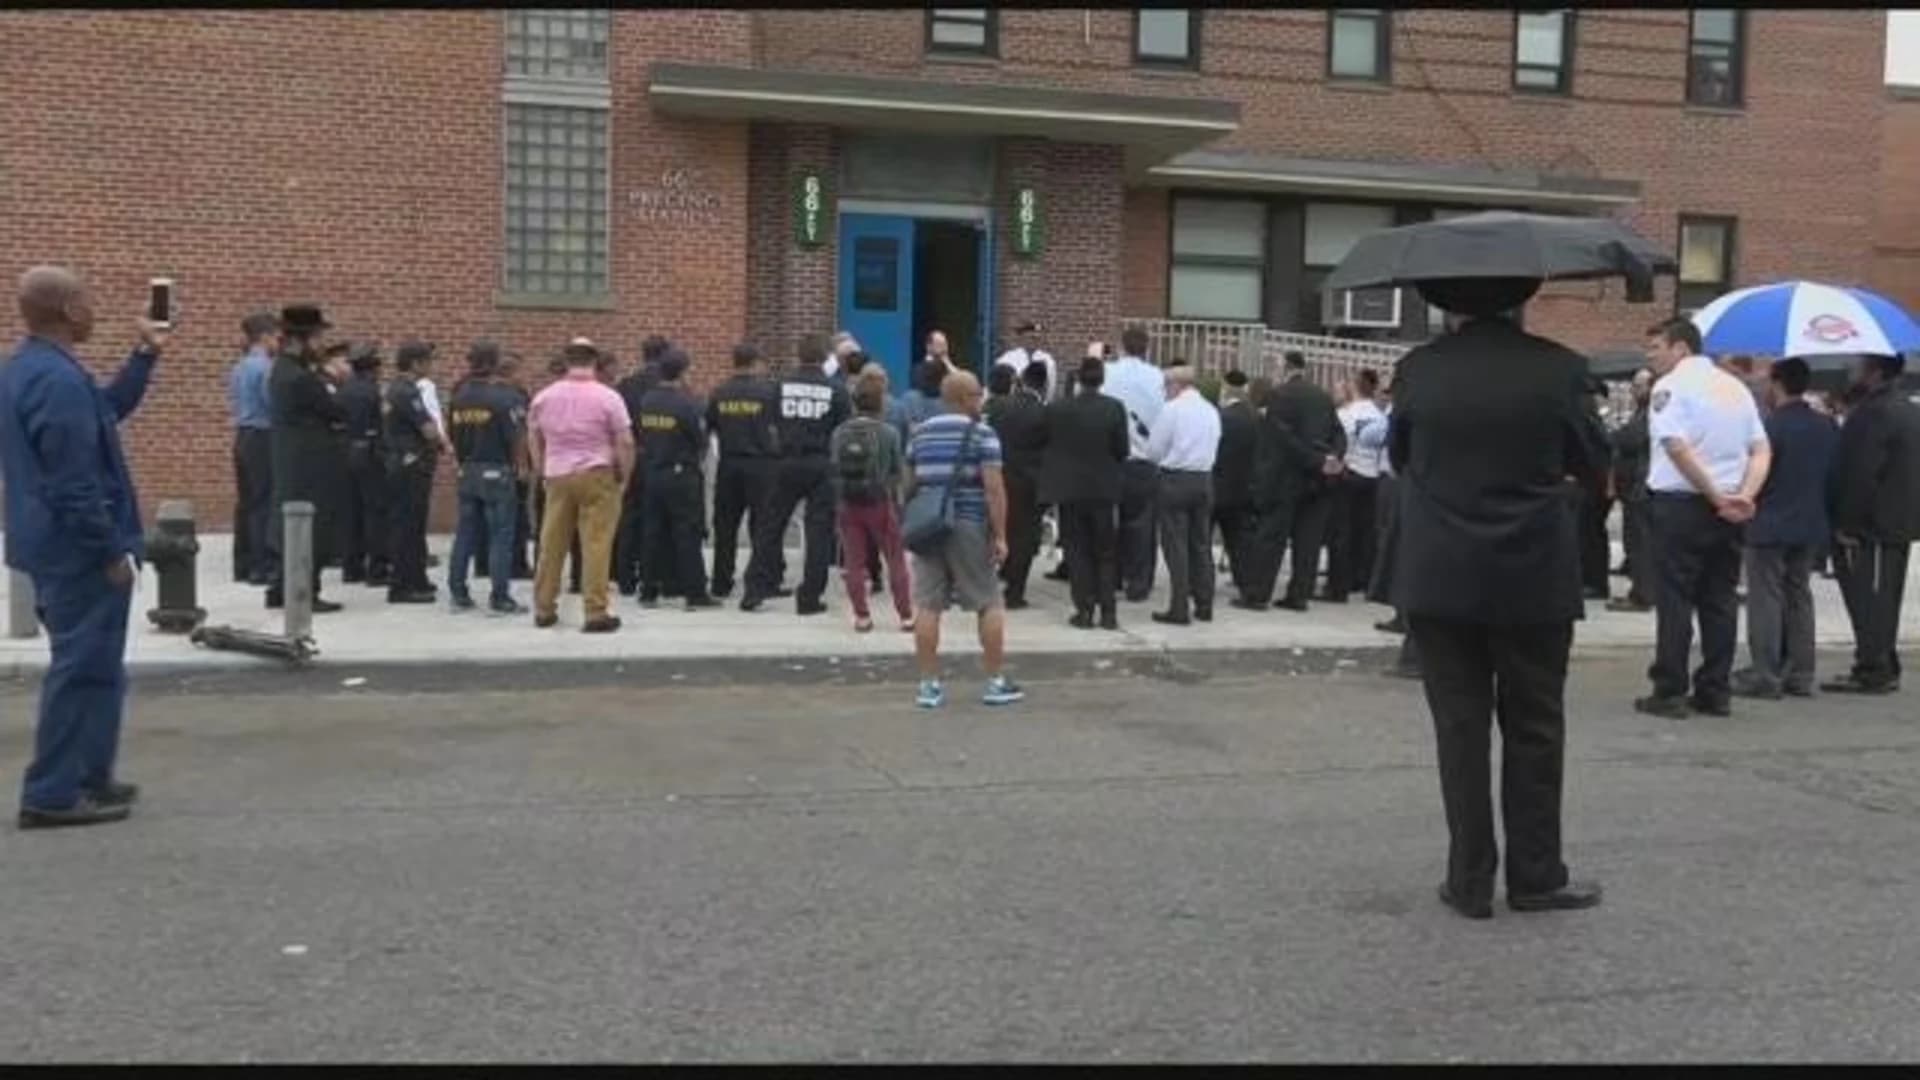 Community gathers in Borough Park in wake of NYPD officer’s death